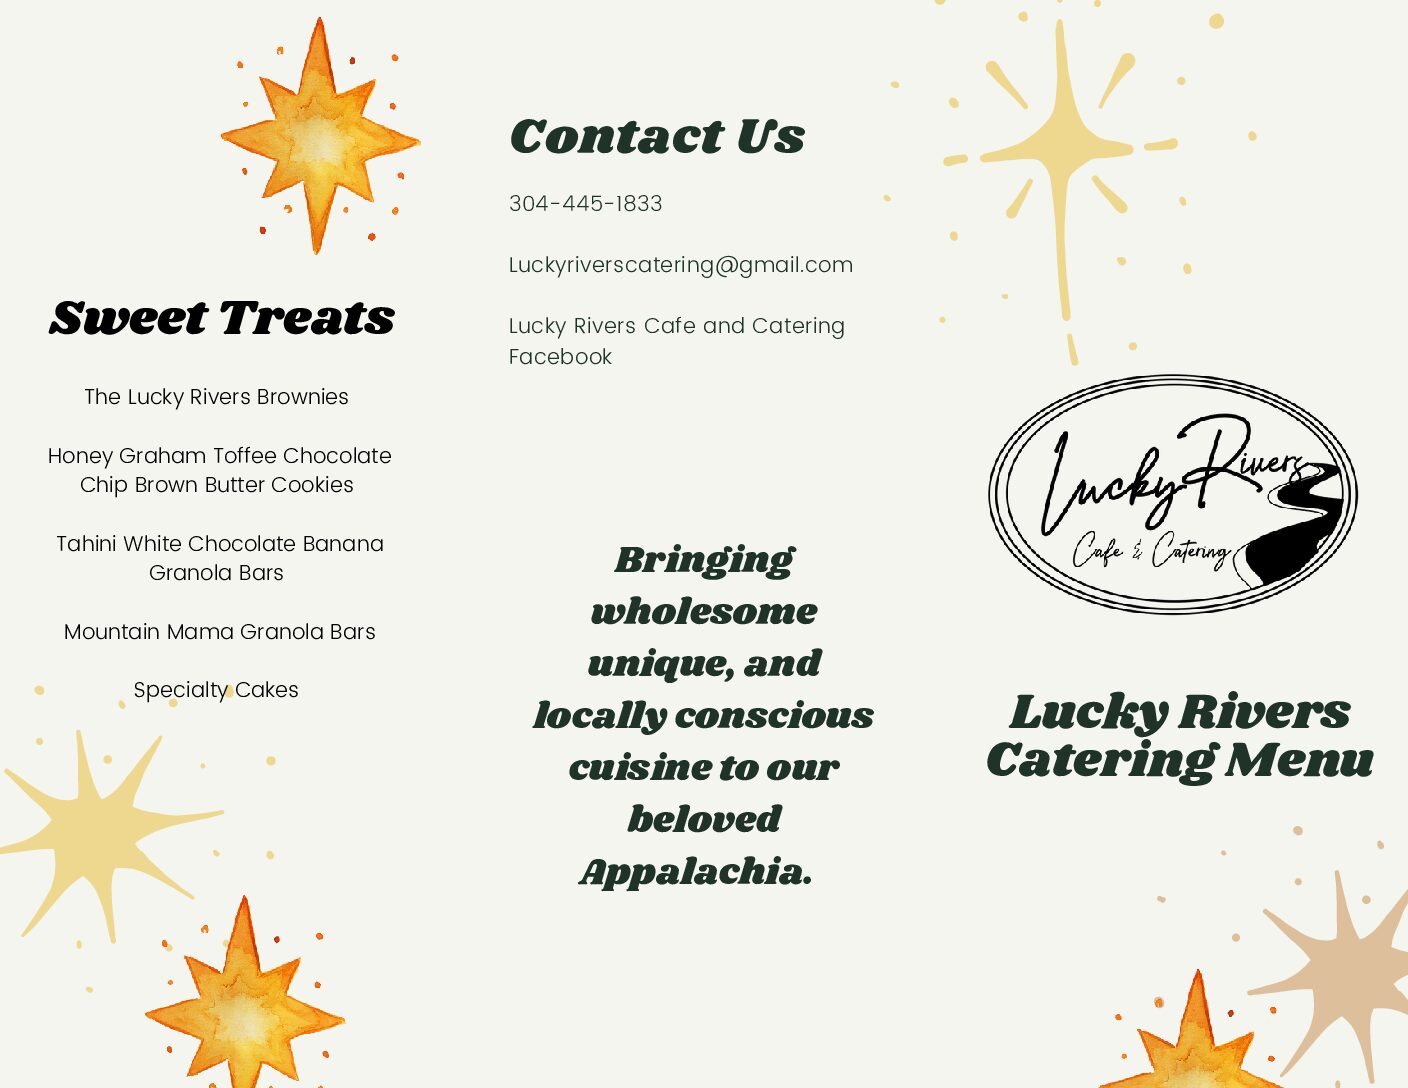 The first page of Lucky Rivers' menu